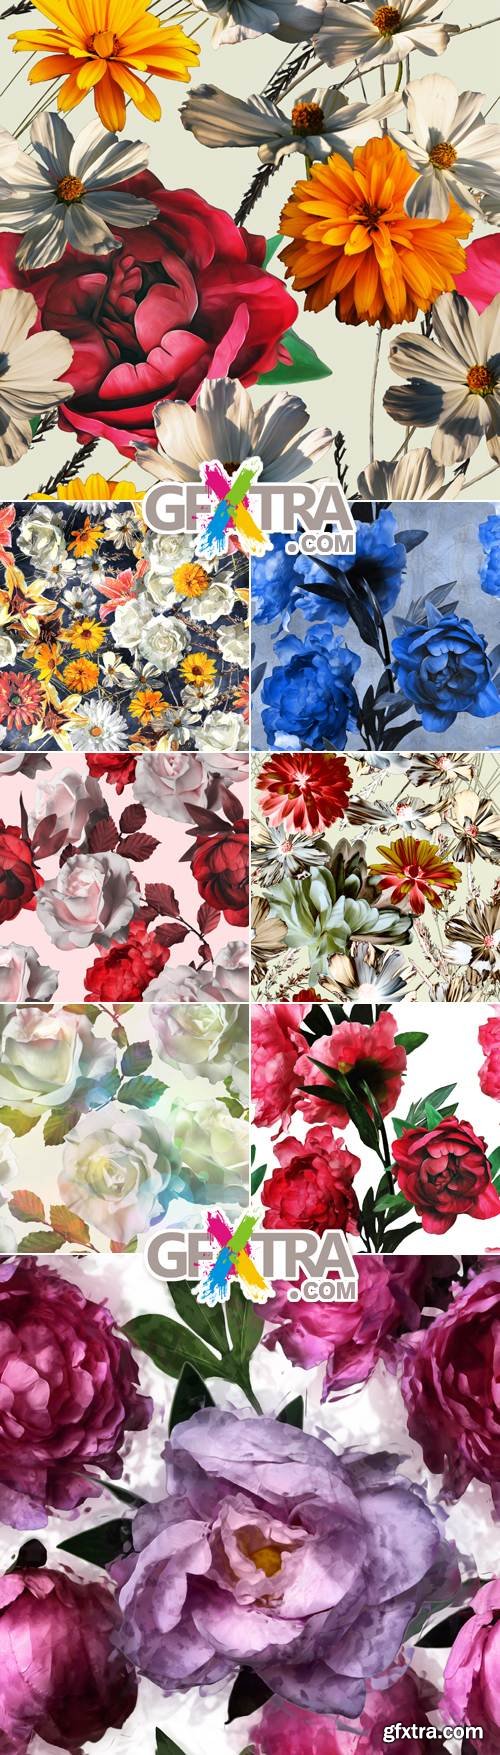 Stock Photo - Flowers Backgrounds 2